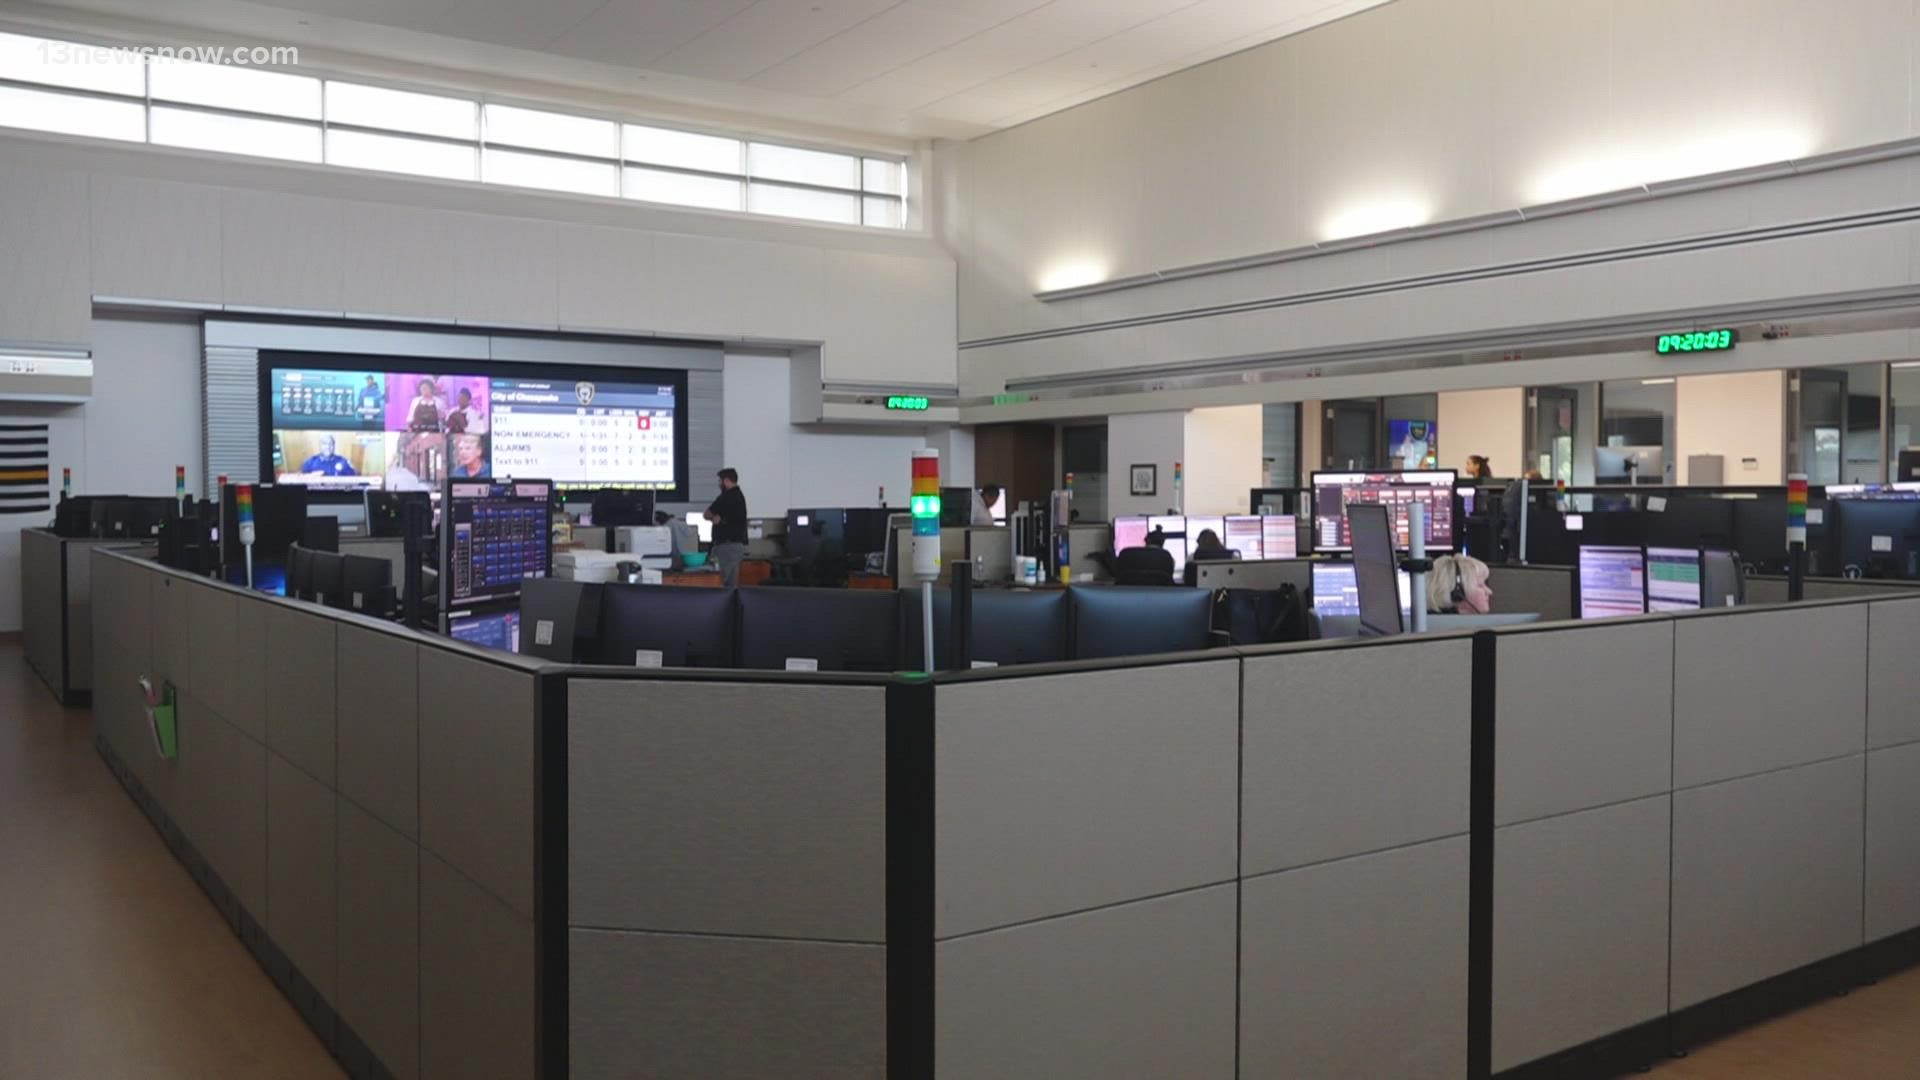 There is a shortage of 911 dispatchers and call takers. Many Hampton Roads cities are down more than 10 workers.